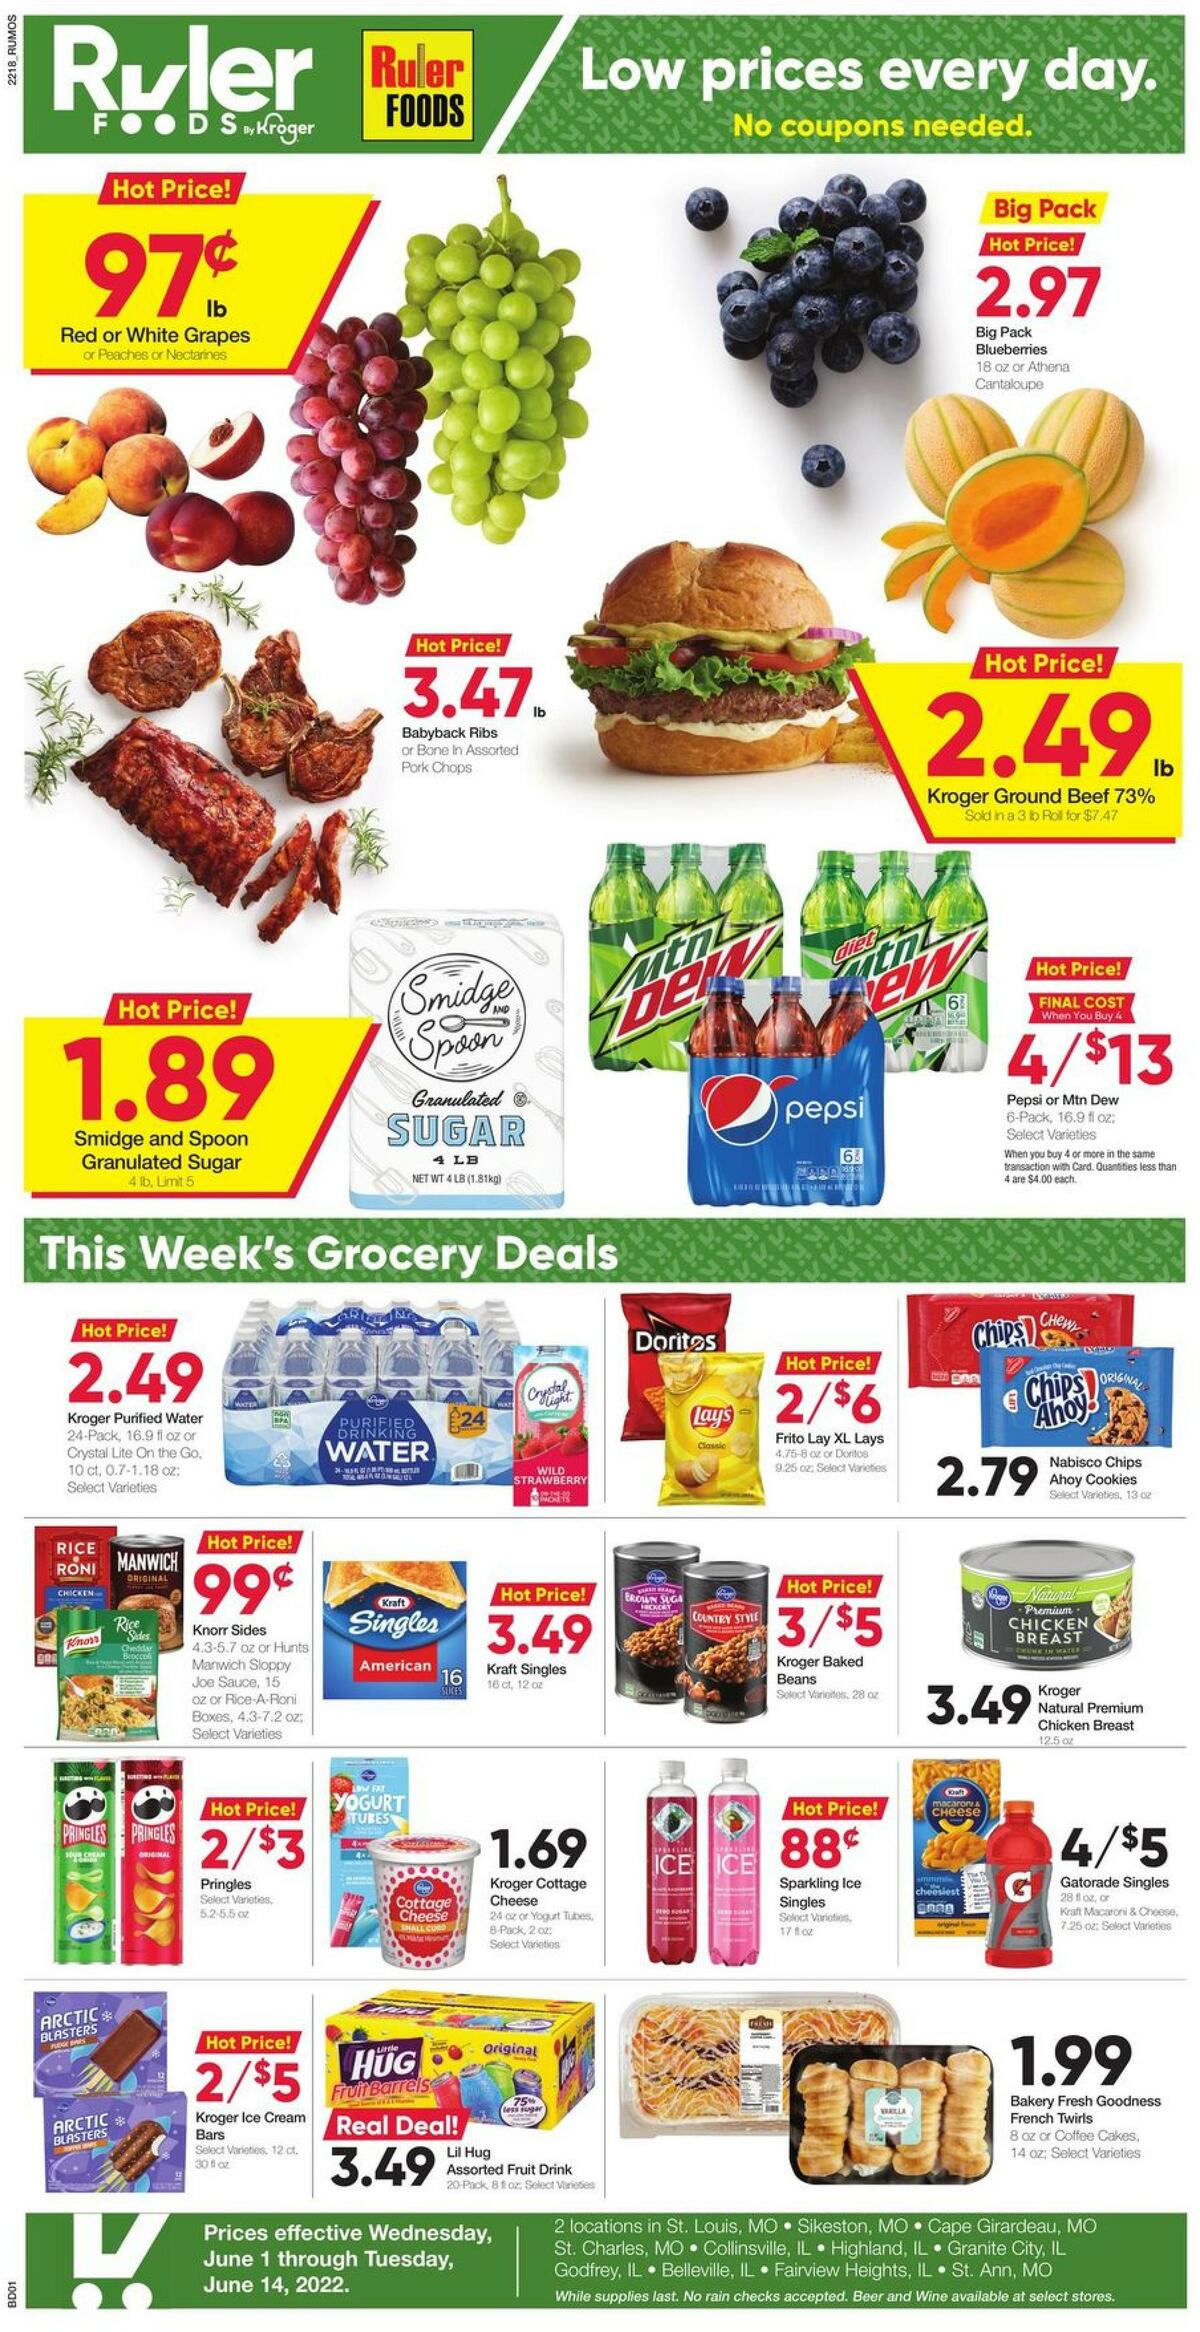 Ruler Foods Weekly Ad from June 1